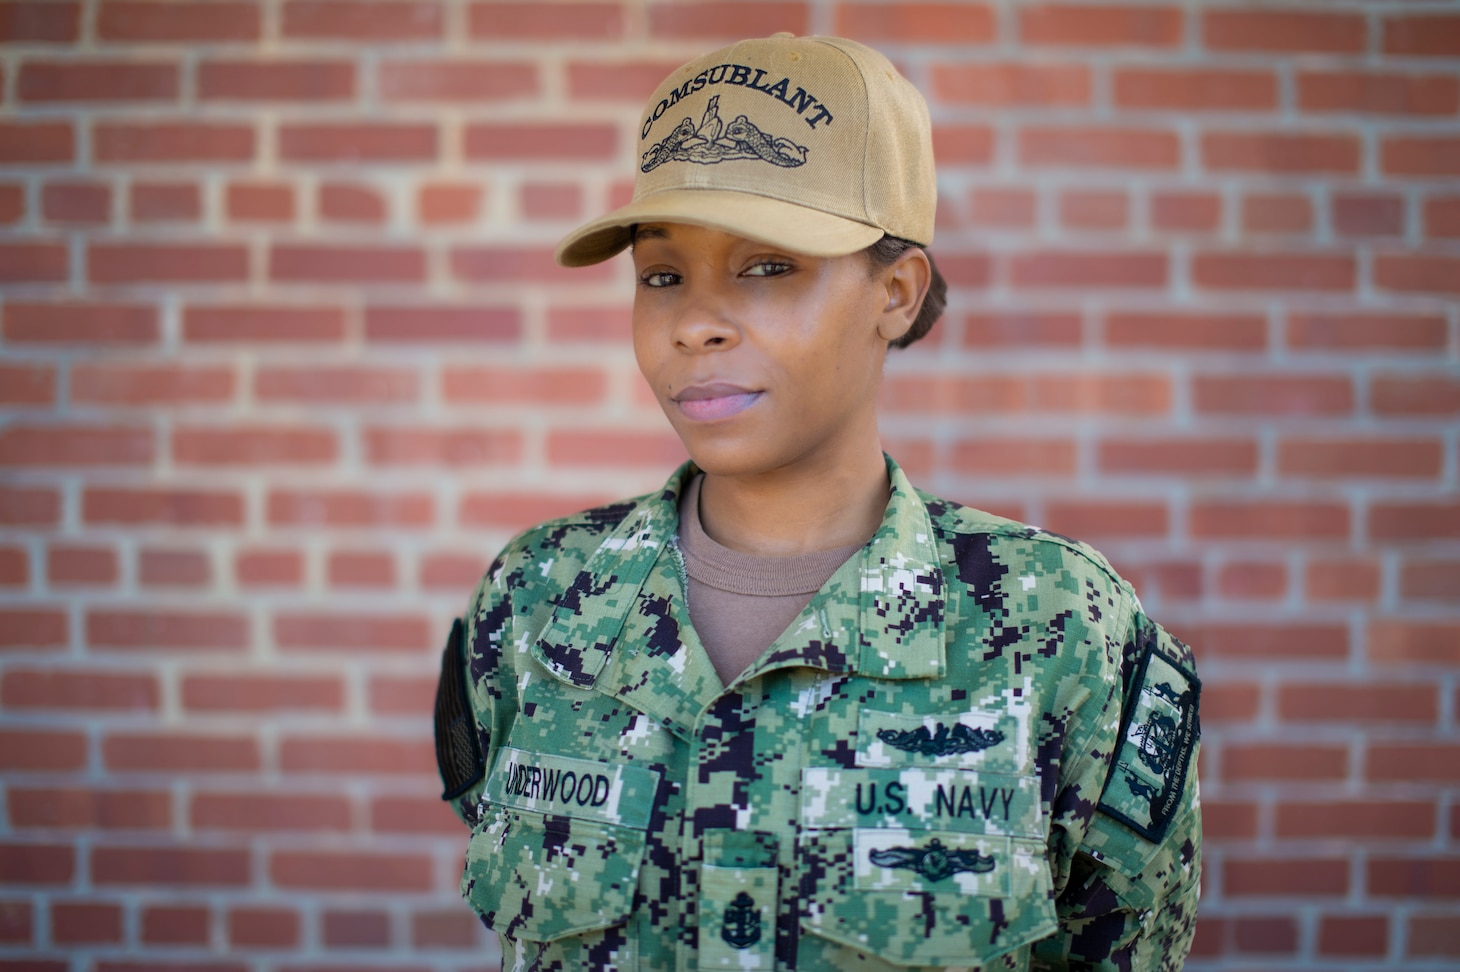 Chief Information Systems Technician (Submarine) Jasmine Underwood poses for a photo at Commander, Submarine Forces Atlantic, March 4, 2021. (